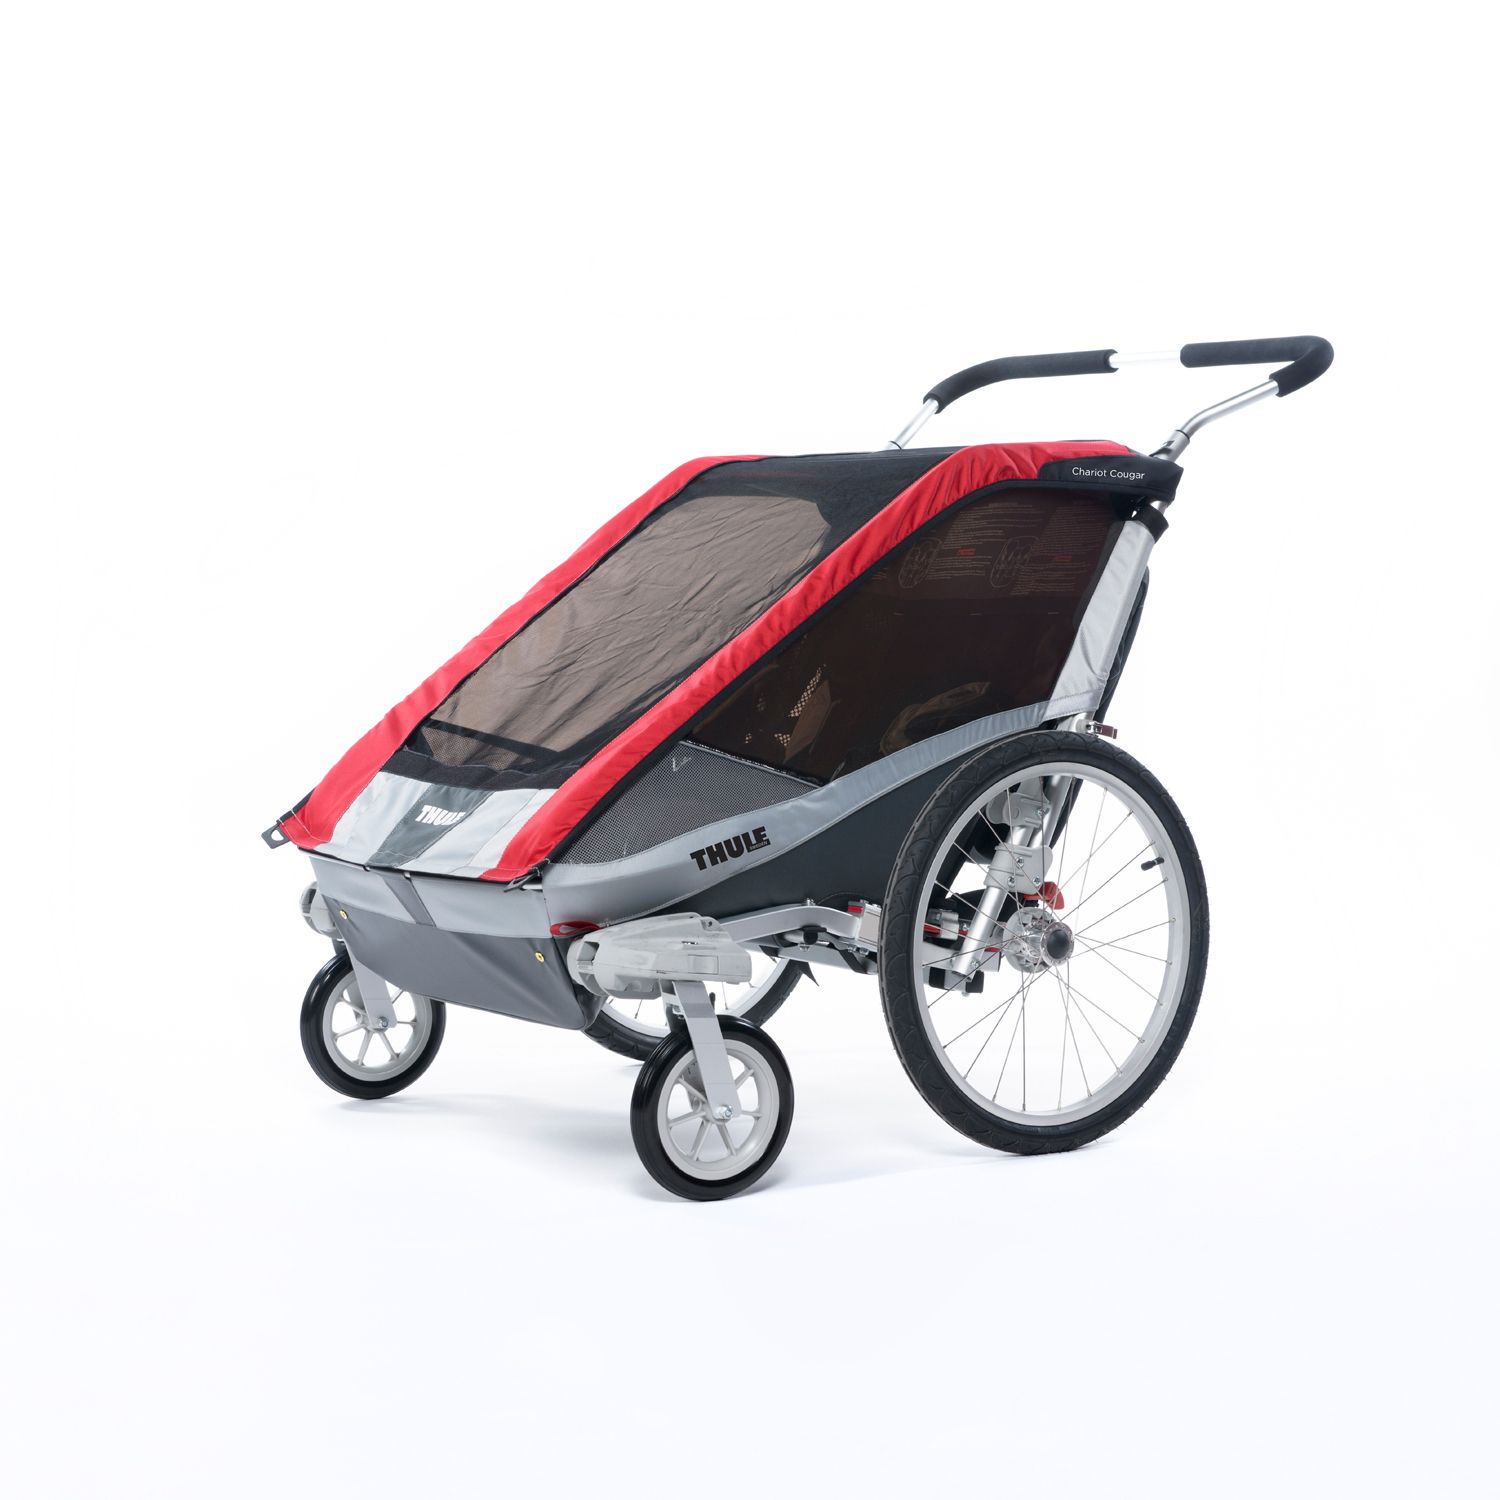 thule chariot cougar buggy set